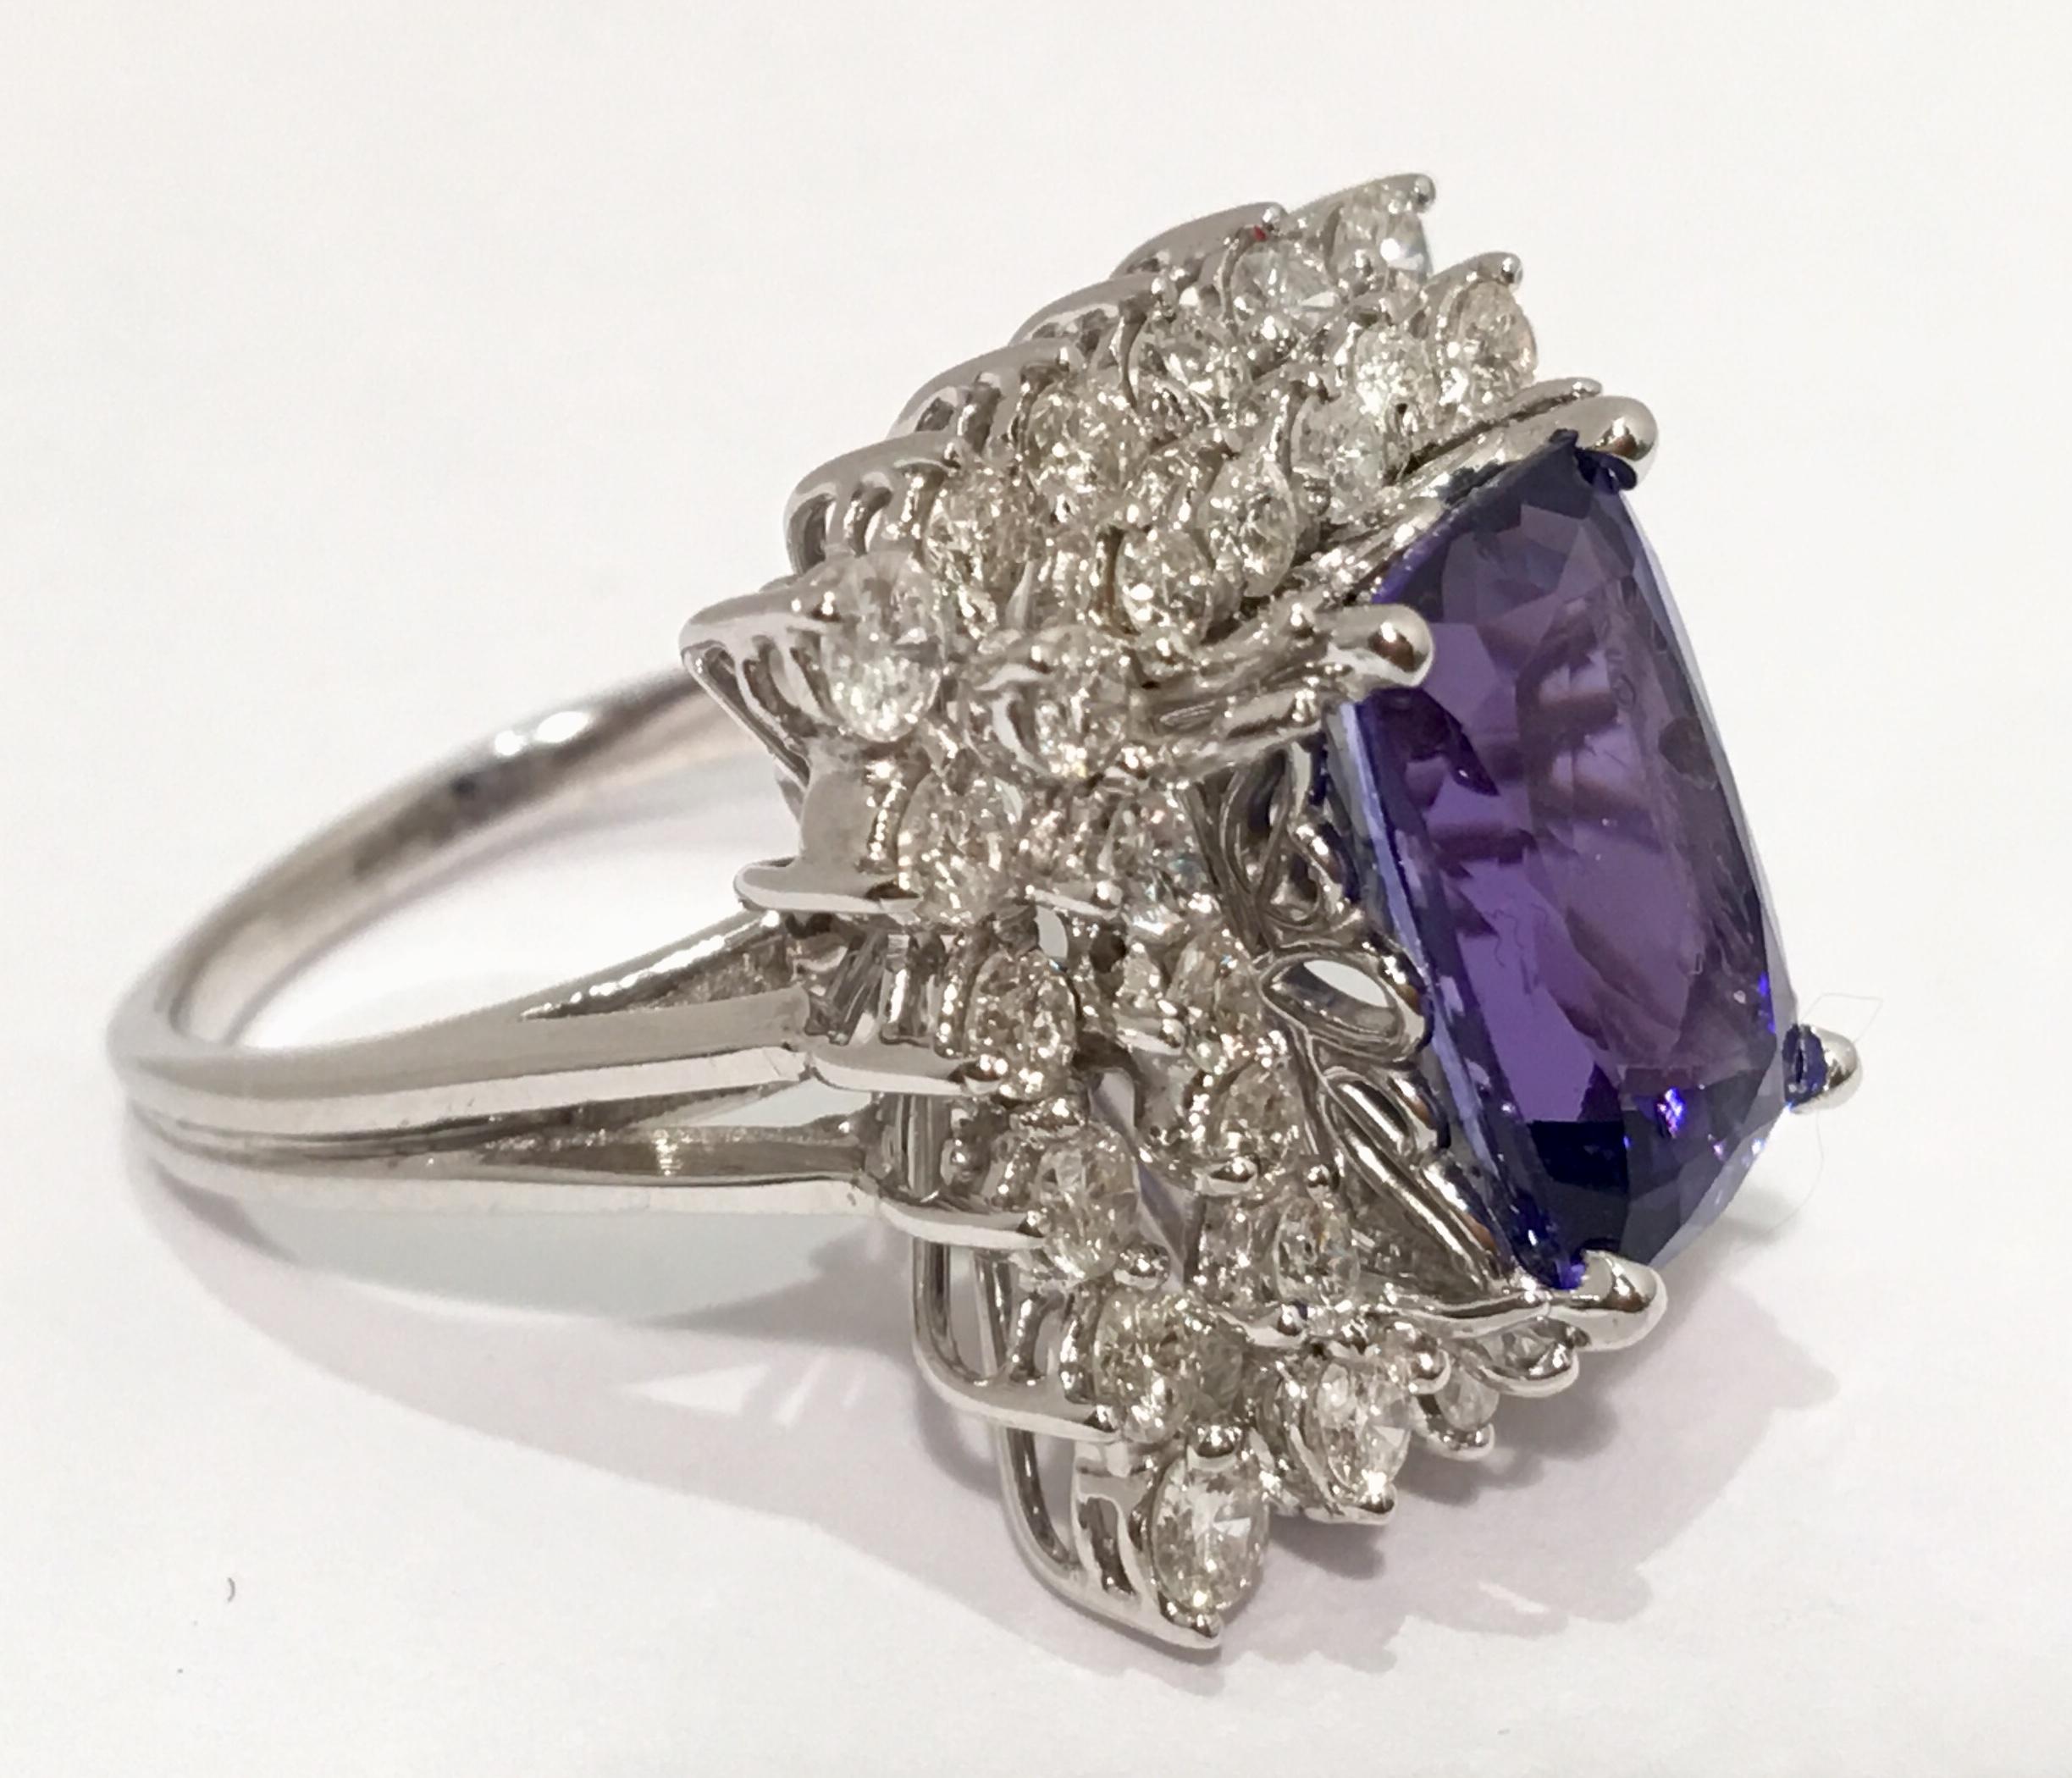 Showy 10.5 Carat Vivid Tanzanite Double Diamond Halo White Gold Cocktail Ring In Excellent Condition For Sale In Tustin, CA